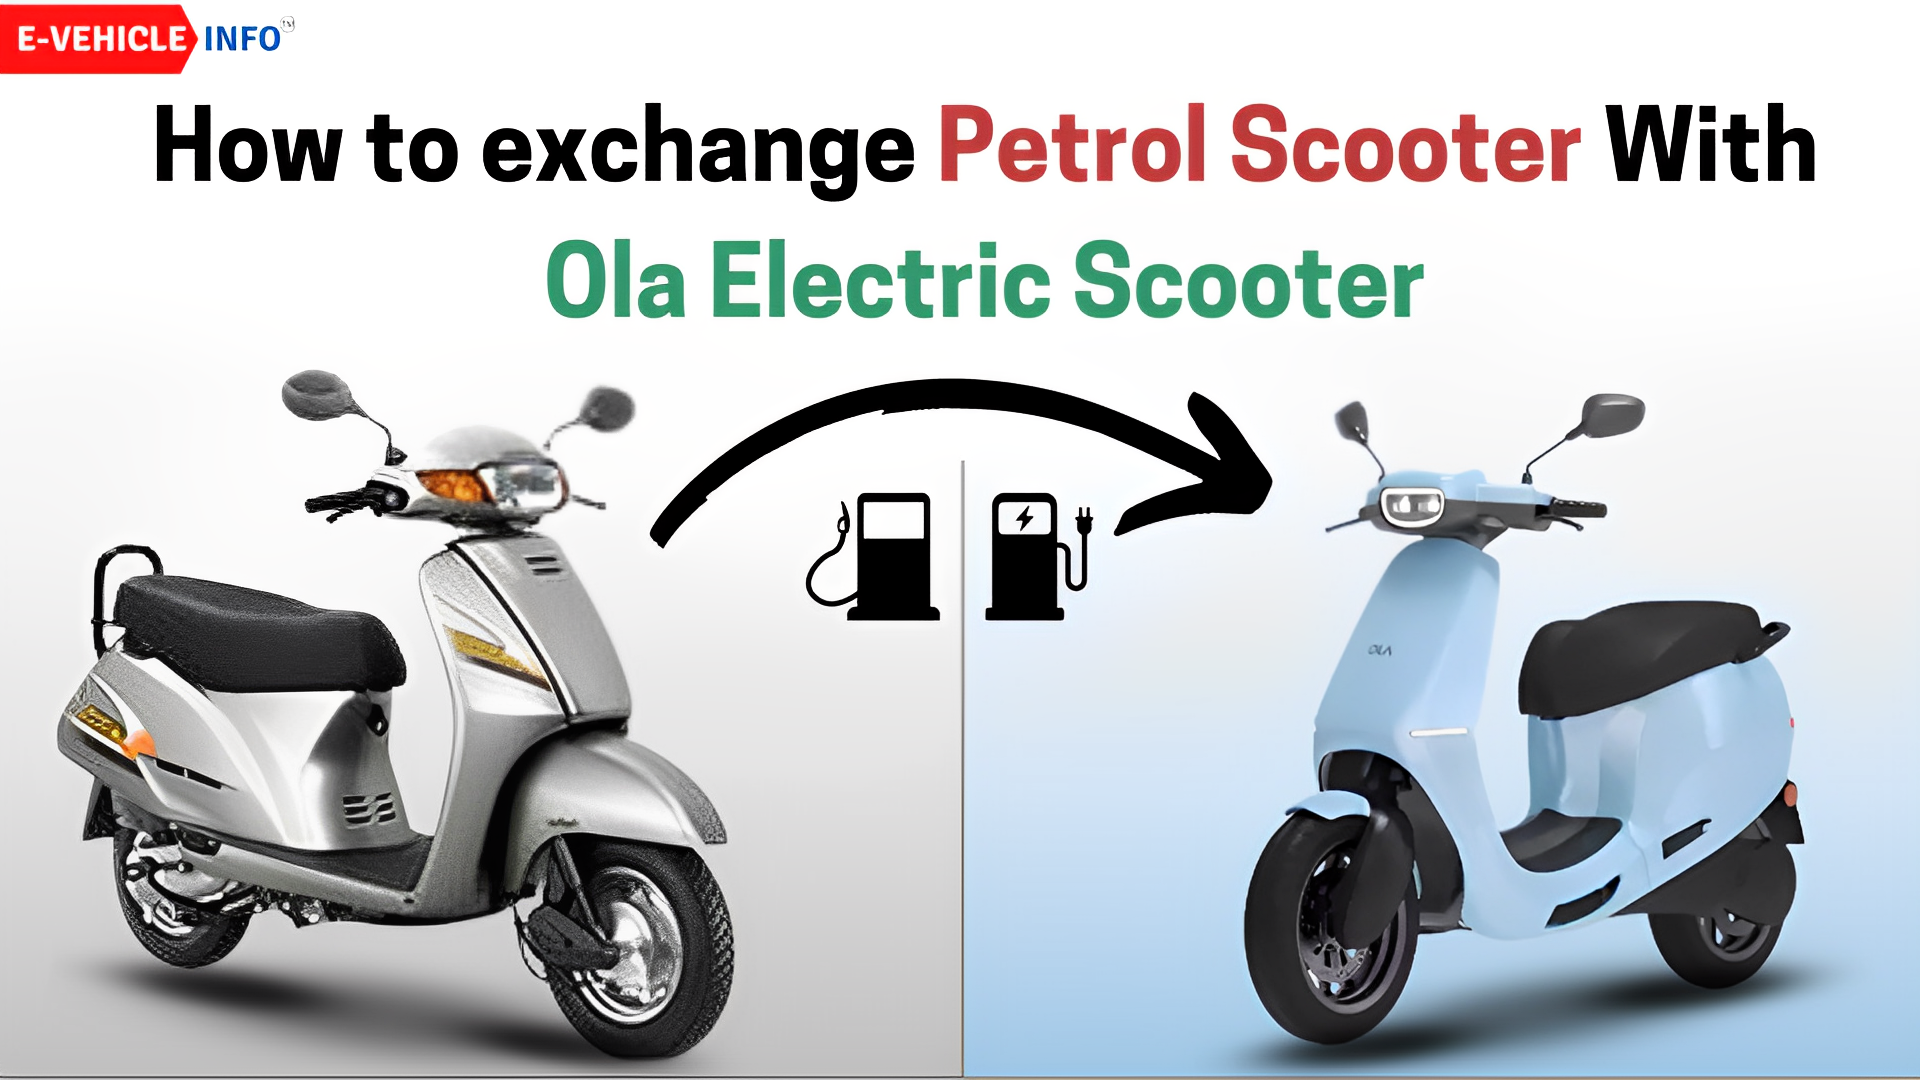 https://e-vehicleinfo.com/how-to-exchange-petrol-scooter-with-ola-electric-scooter/